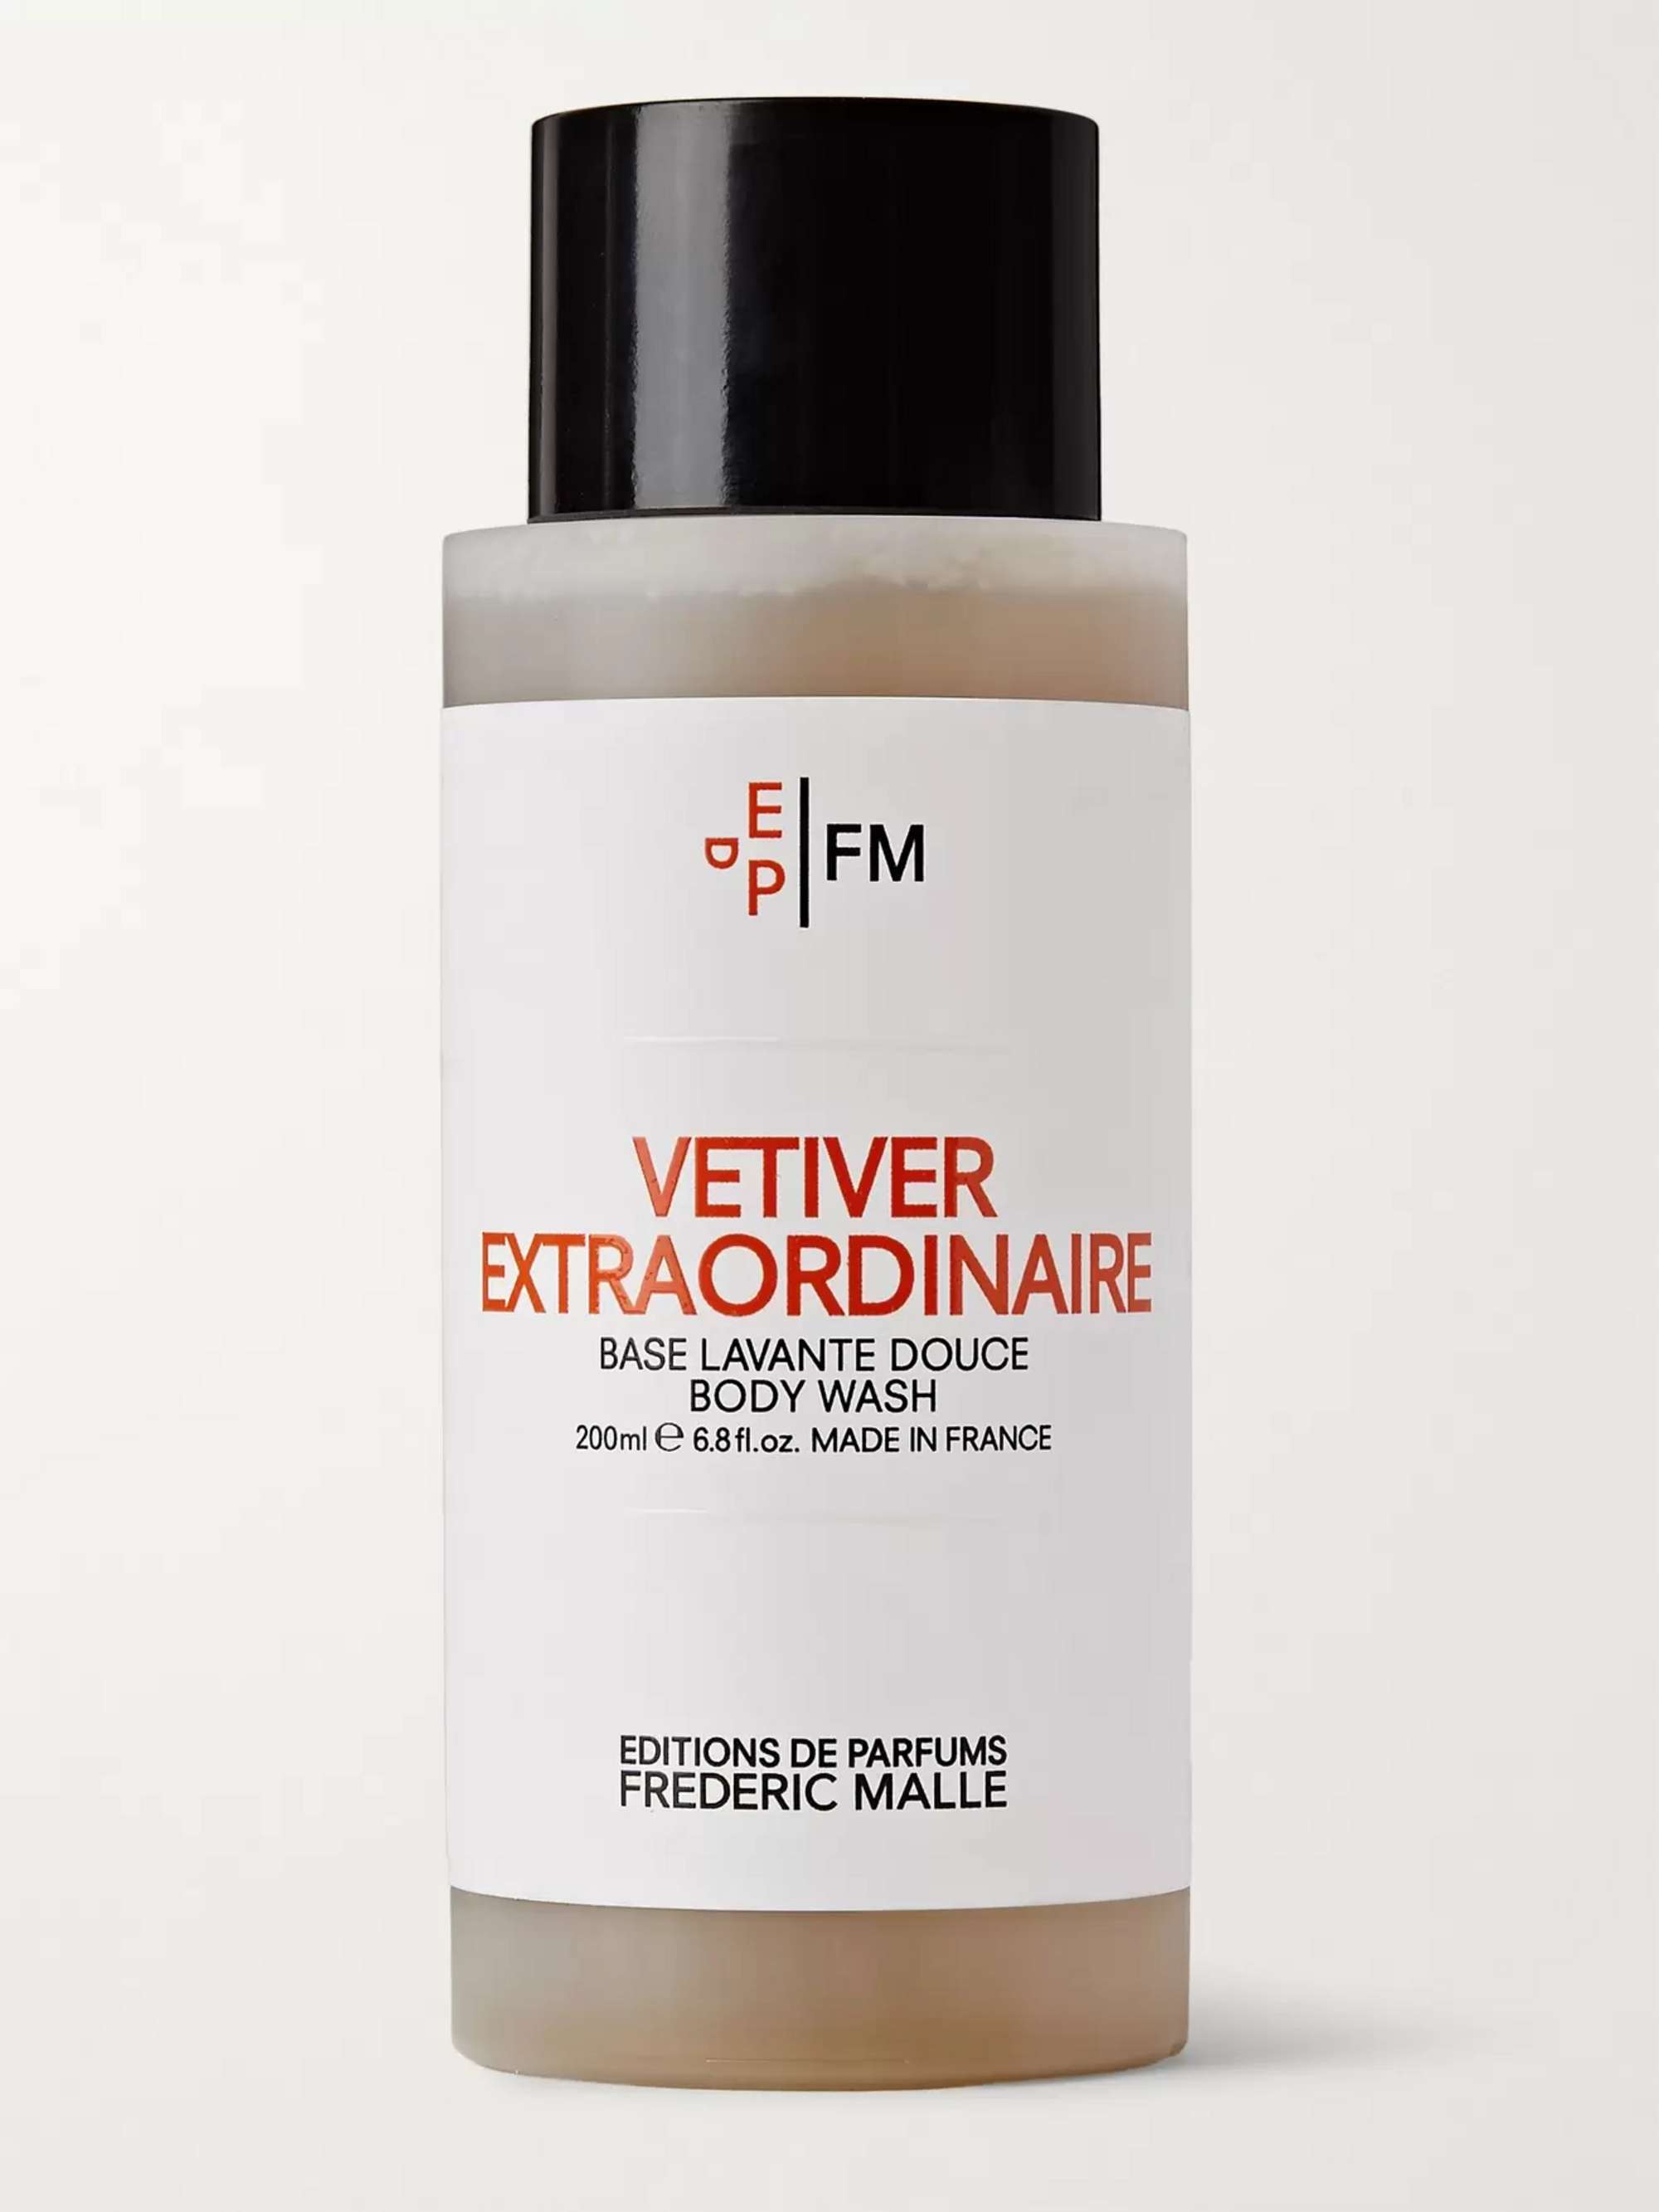 Frederic Malle Vetiver Extraordinaire Body Wash, 200ml